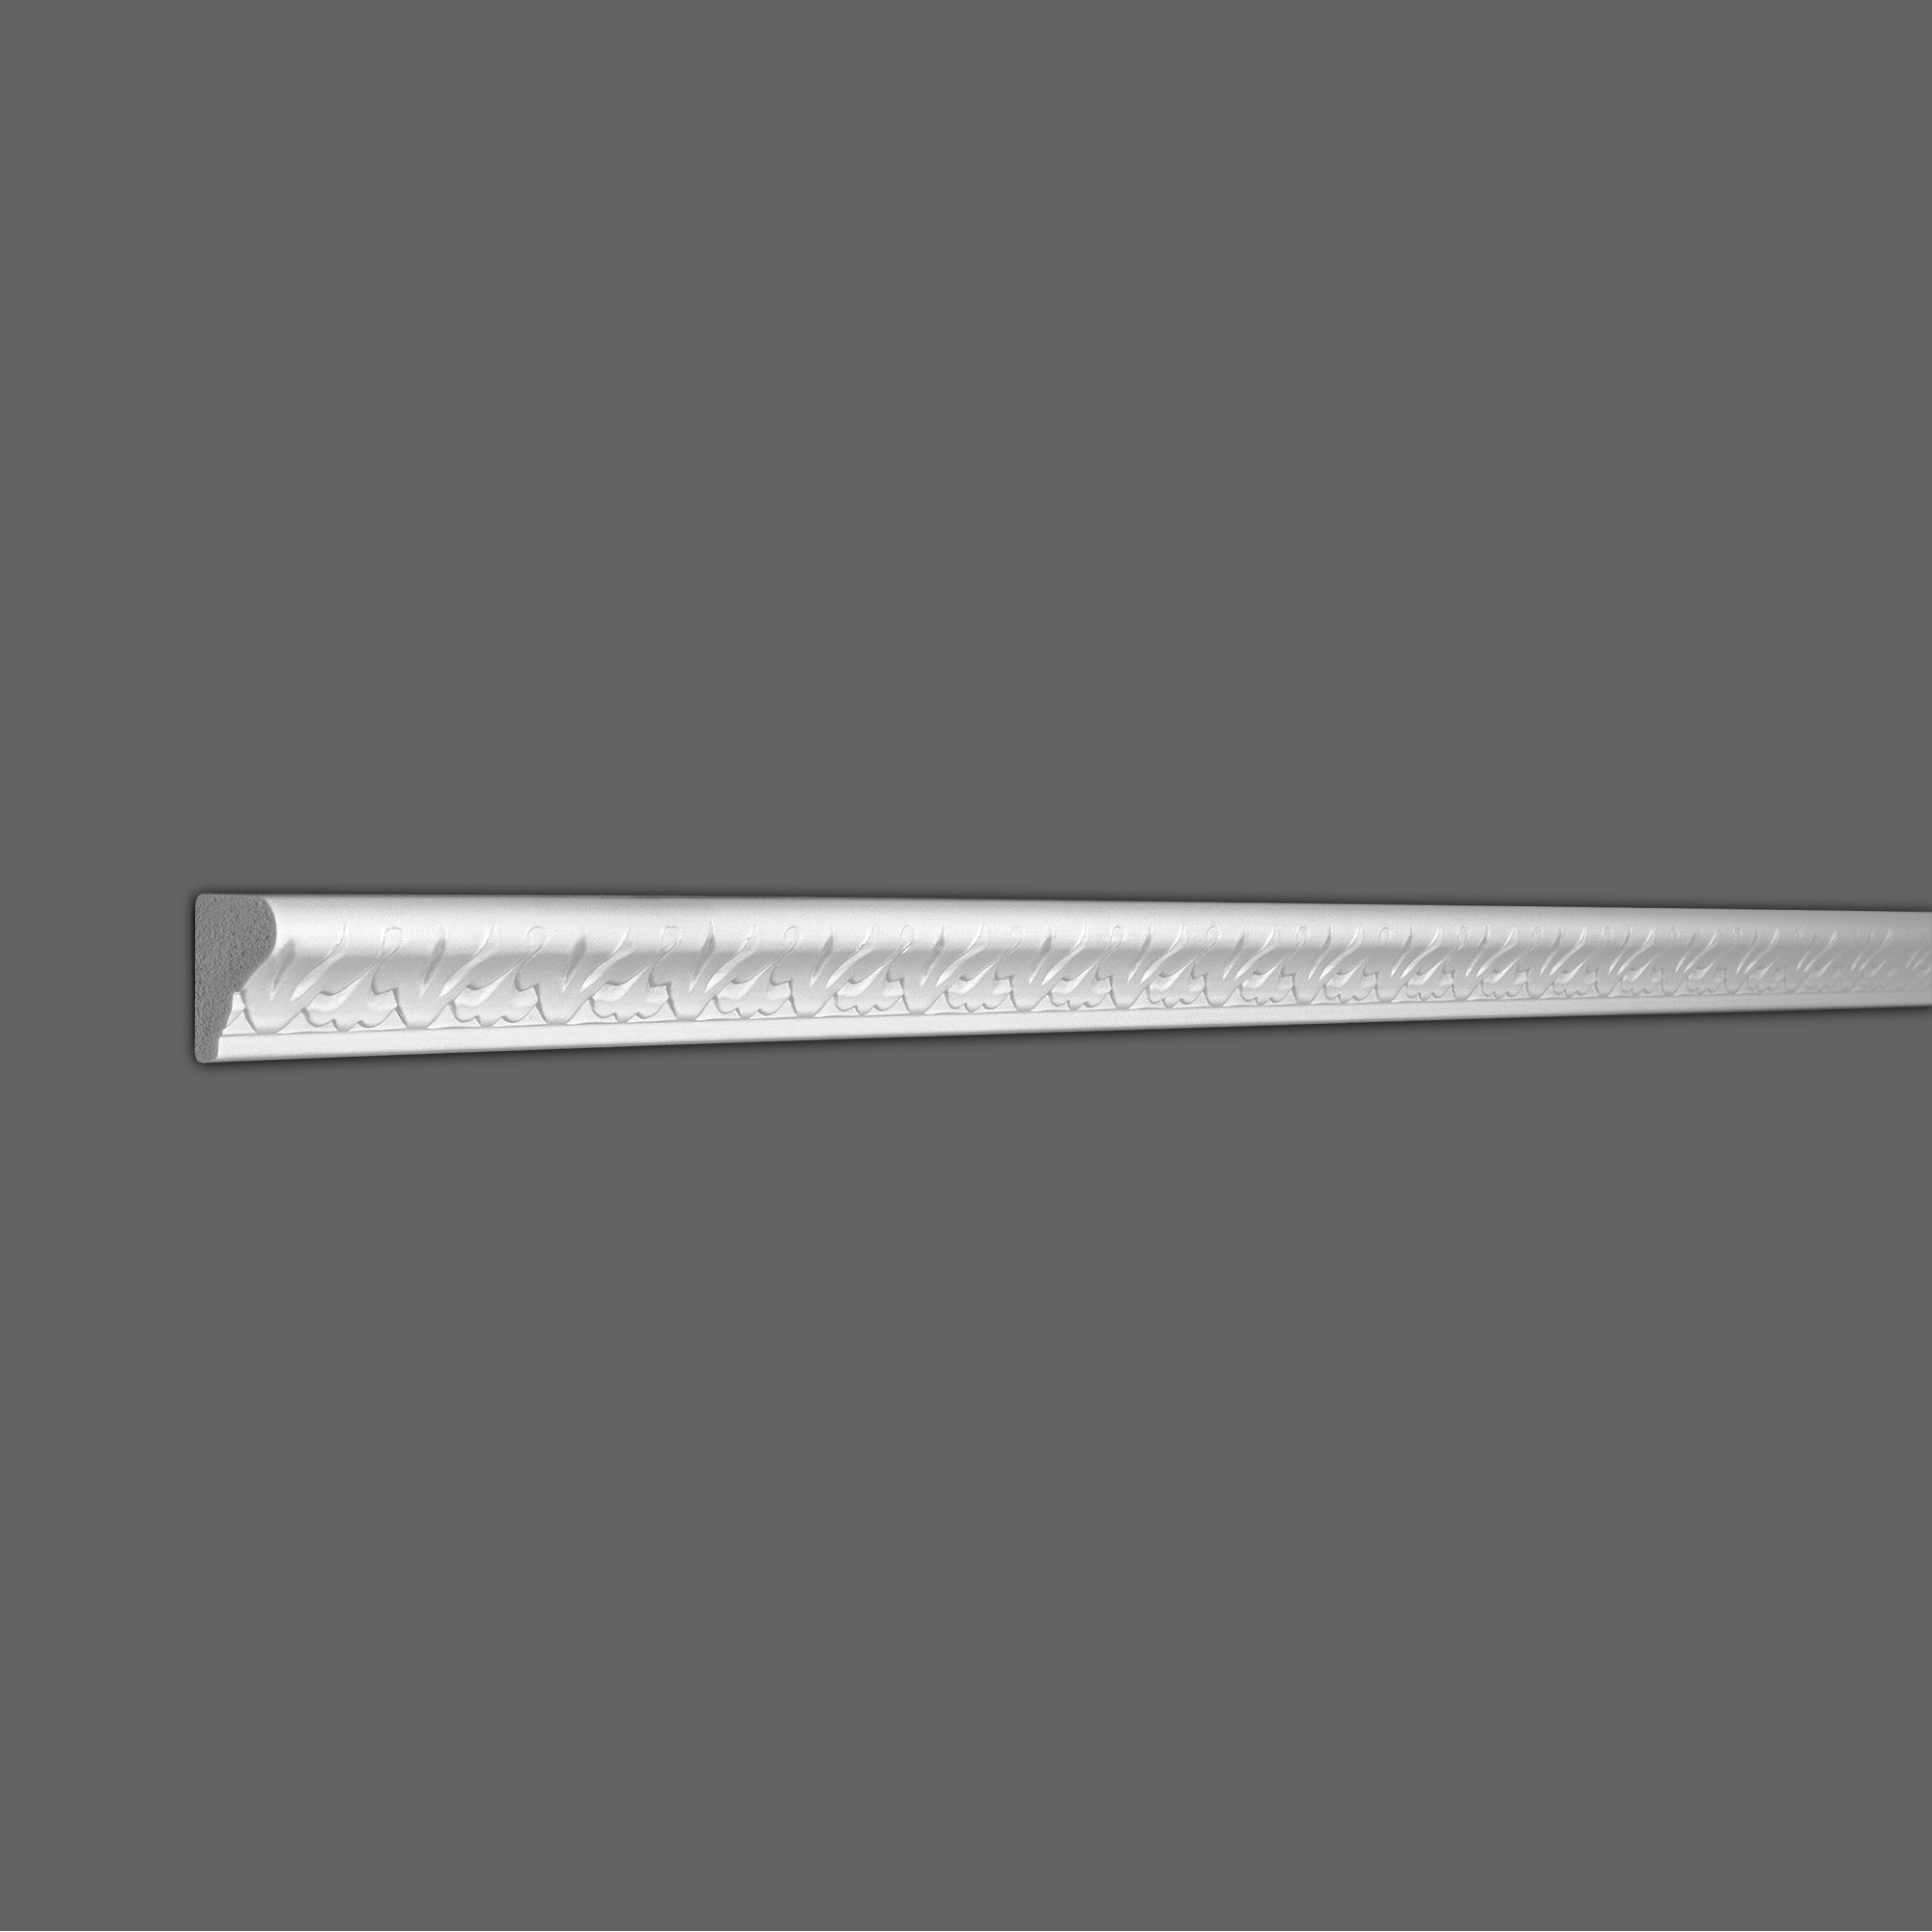 RPS-3307 H: 1-3/8" x Proj: 7/8" x L: 8' x Design Repeat: 2-1/4" Primed White Polymer Panel Moulding (8 Pack/62+Feet) - image 5 of 5